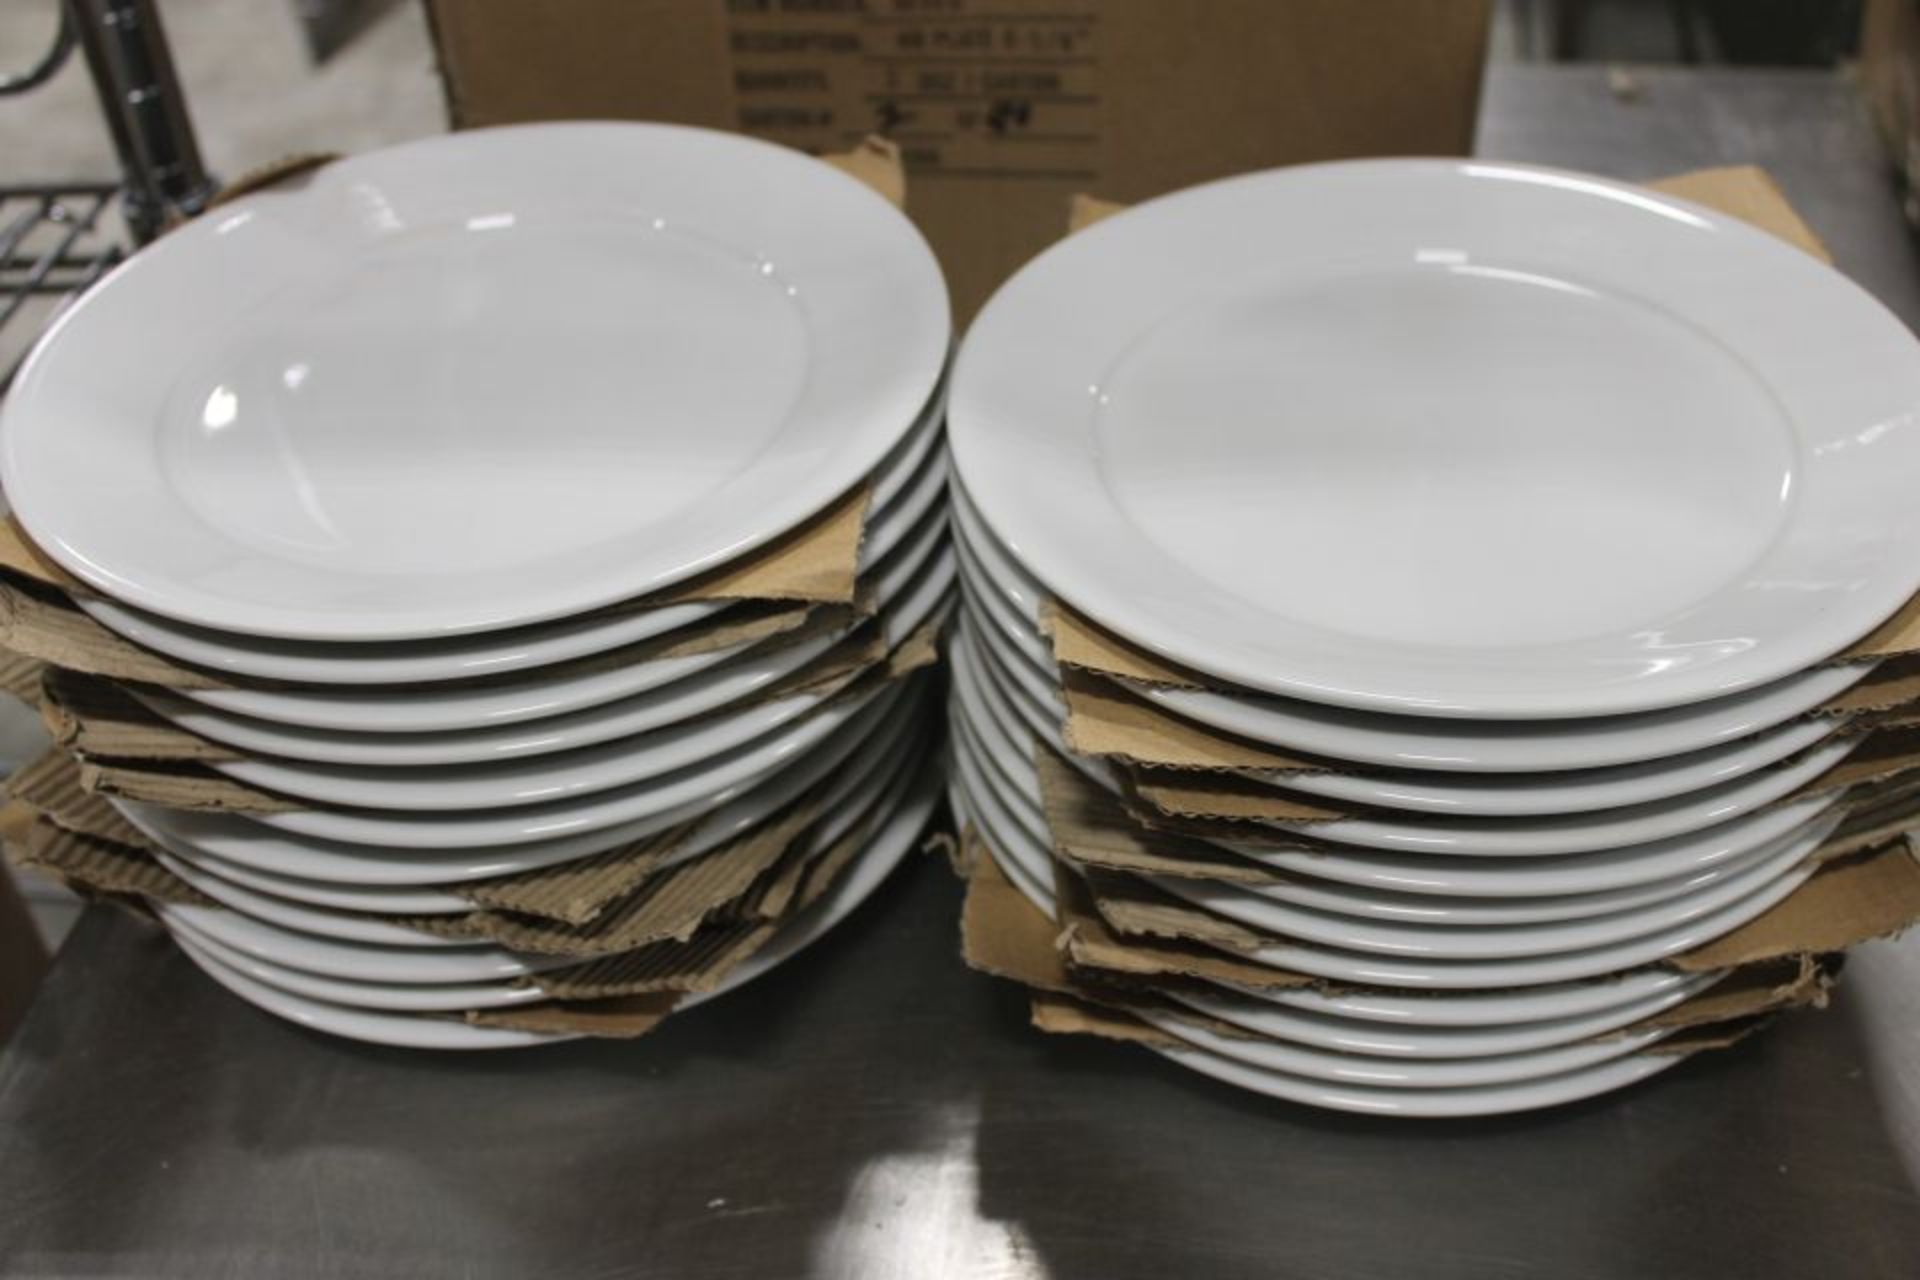 8.25" Plates - Lot of 24